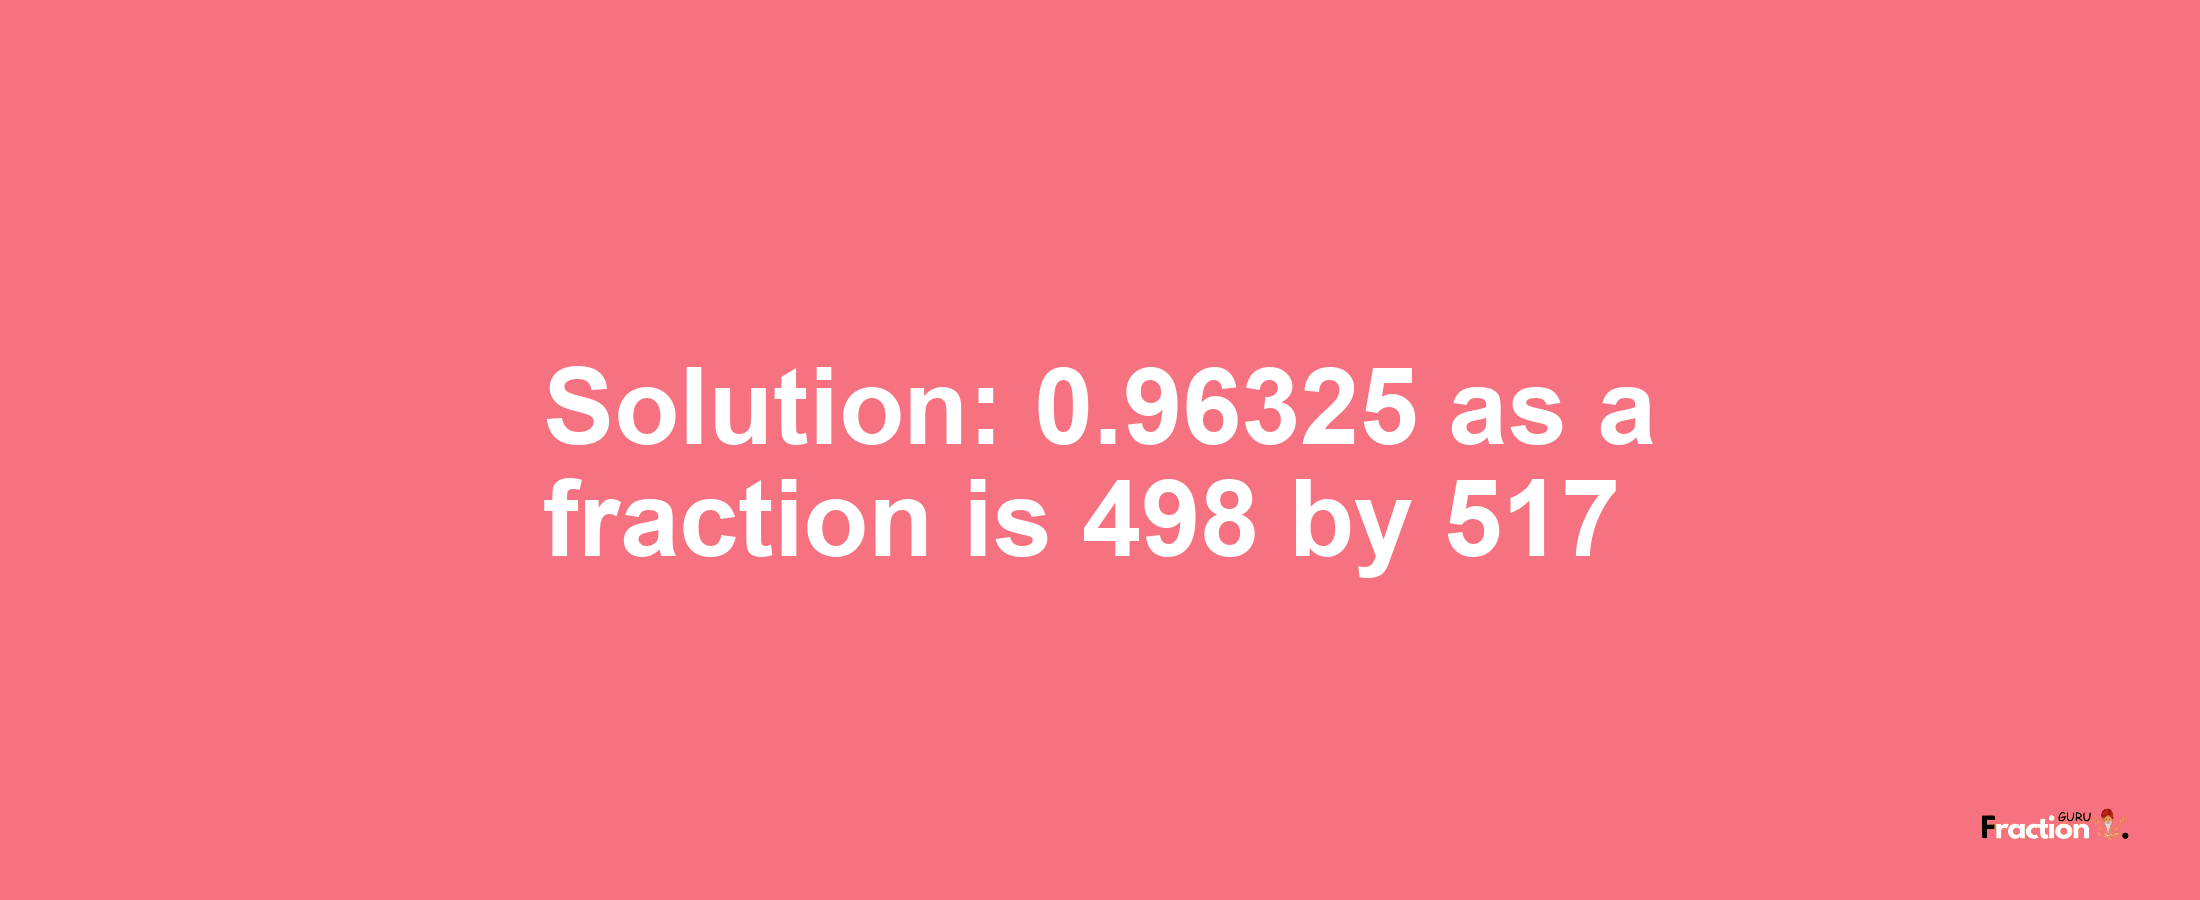 Solution:0.96325 as a fraction is 498/517